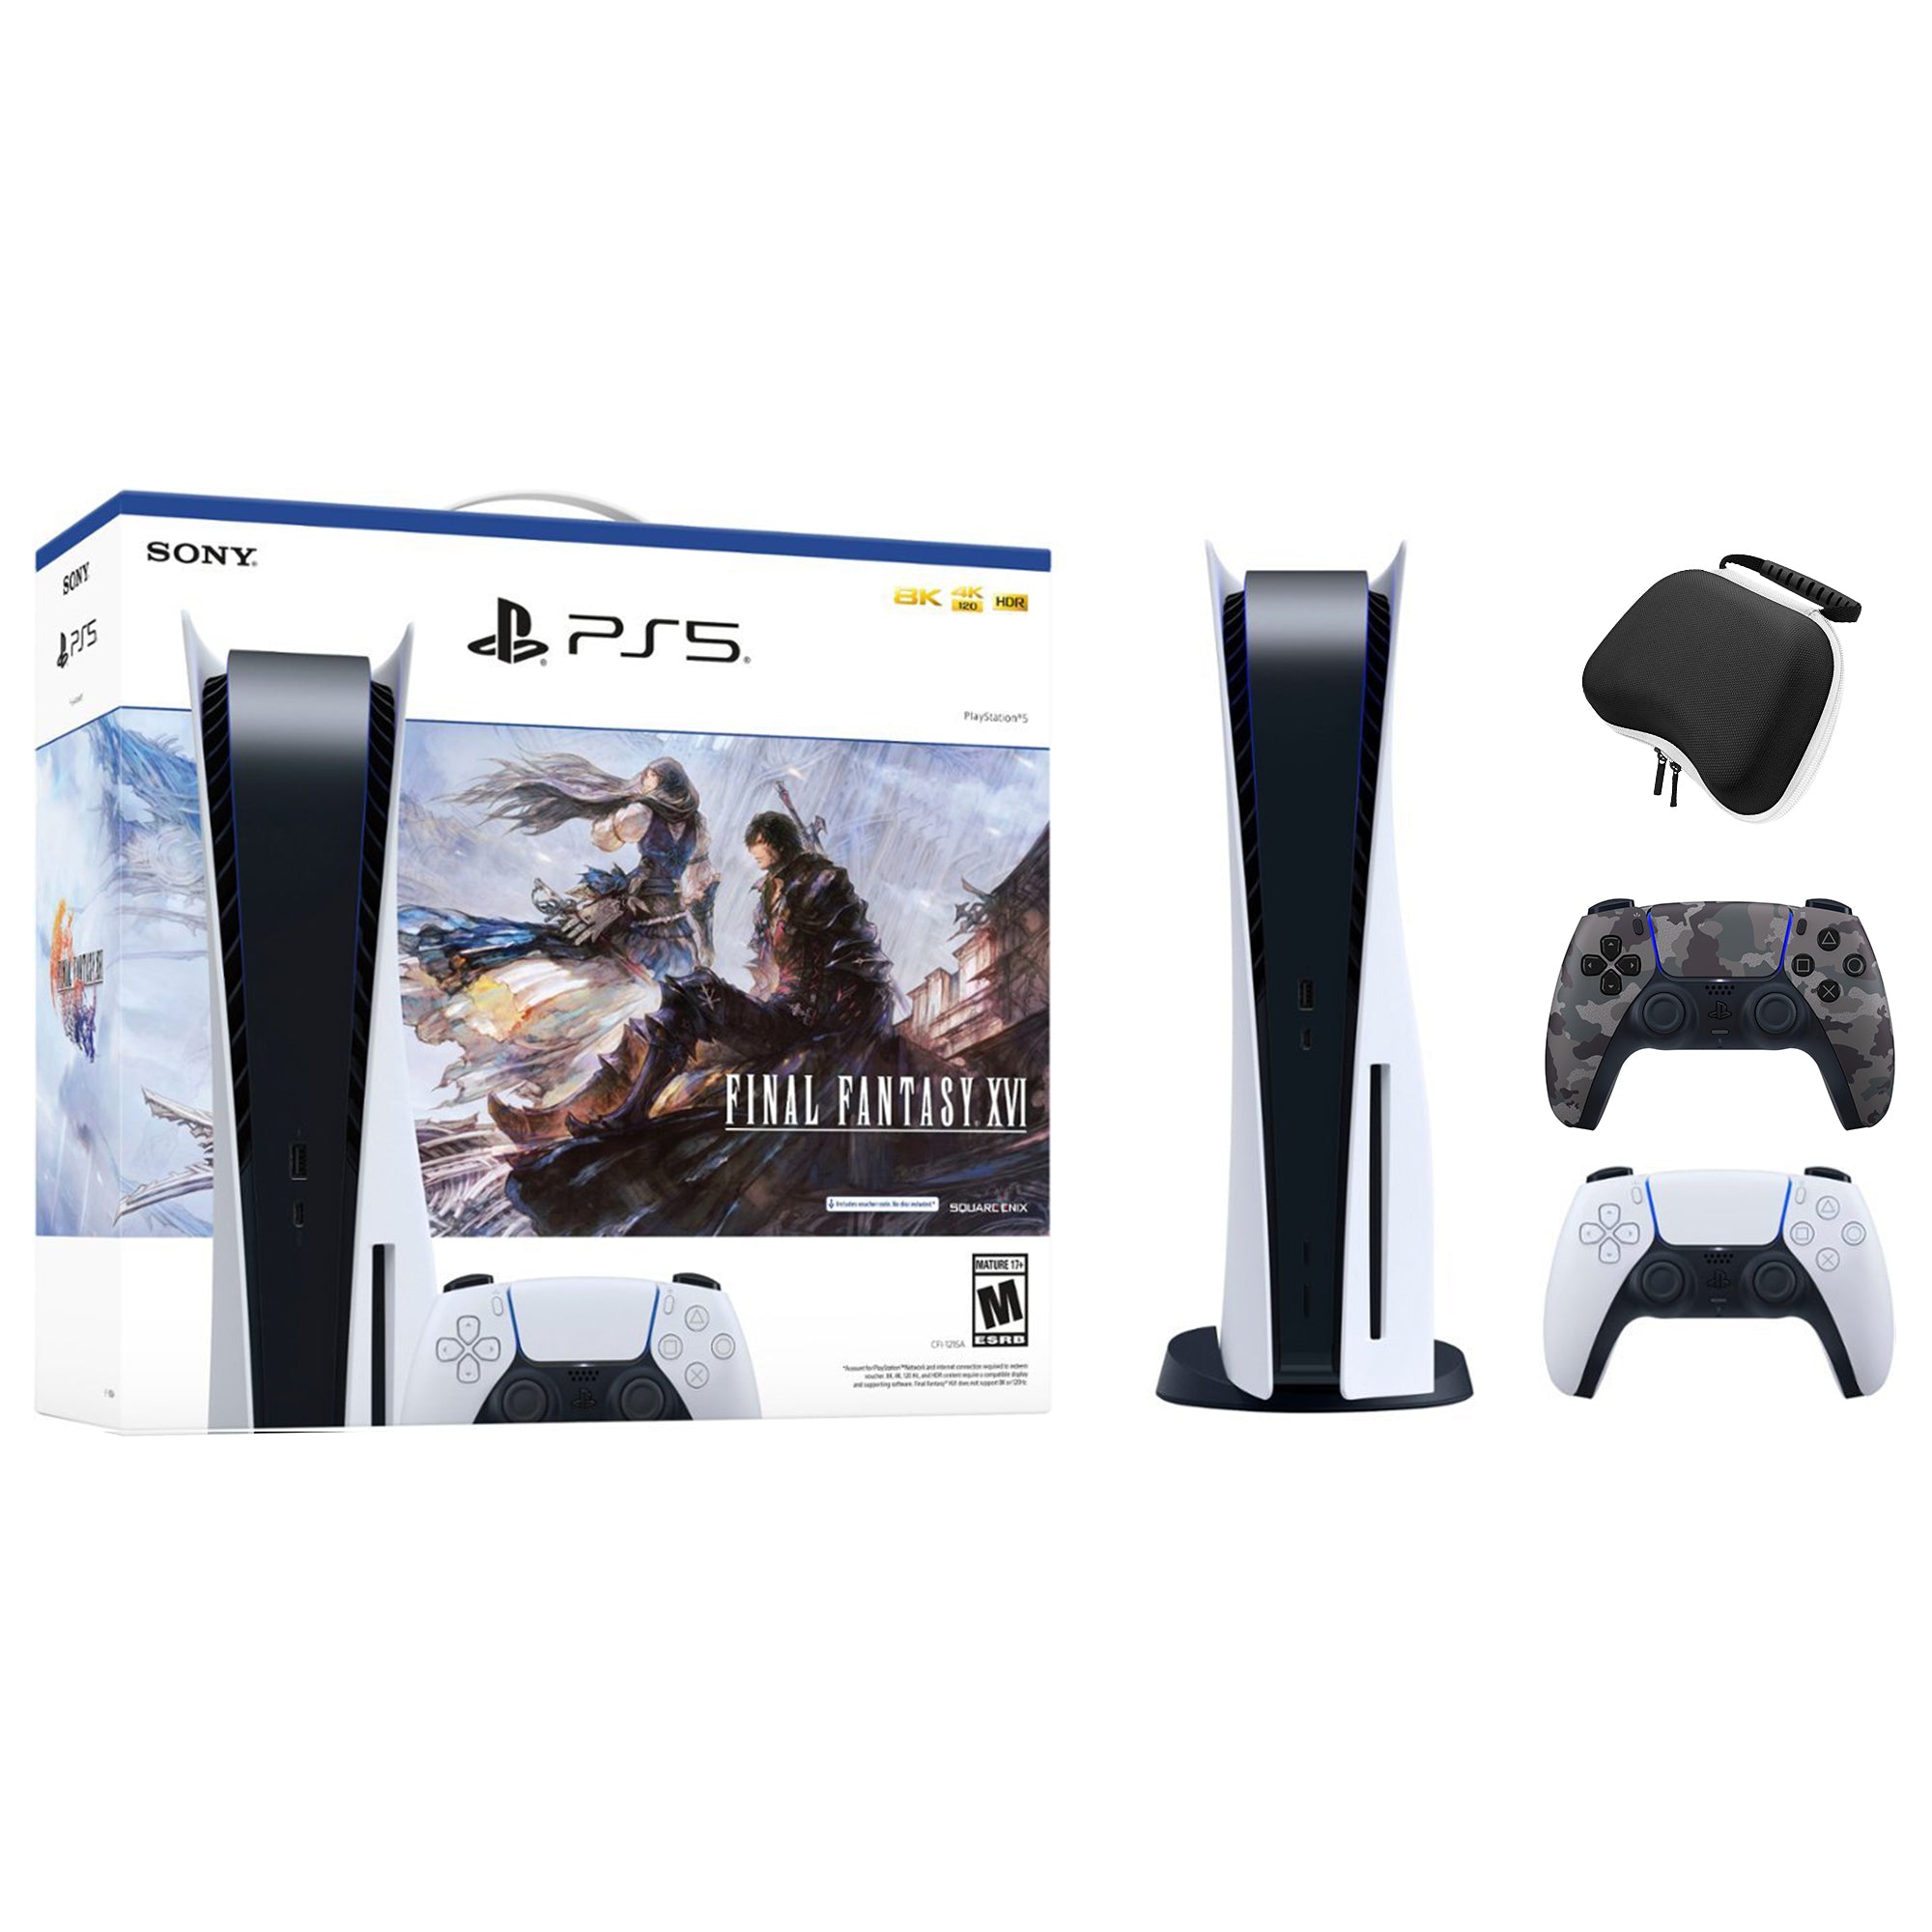 PlayStation 5 Disc Edition FINAL FANTASY XVI Bundle with Two Controllers White and Gray Camouflage DualSense and Mytrix Hard Shell Protective Controller Case - PS5 Gaming Console